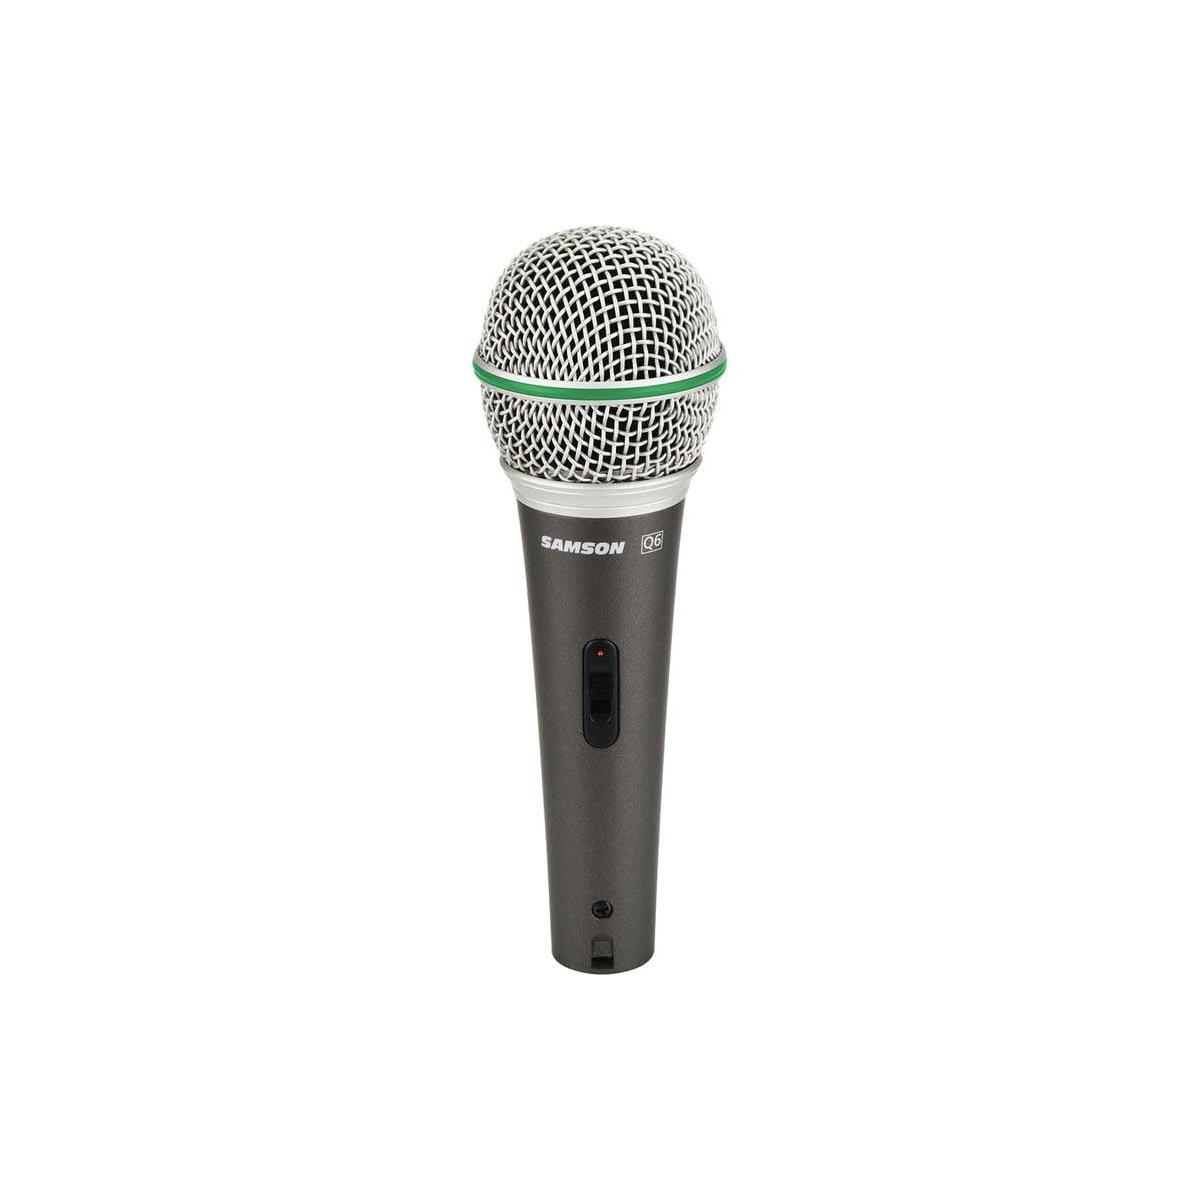 Image of Samson Q6 Dynamic Supercardioid Handheld Microphone with On/Off Switch